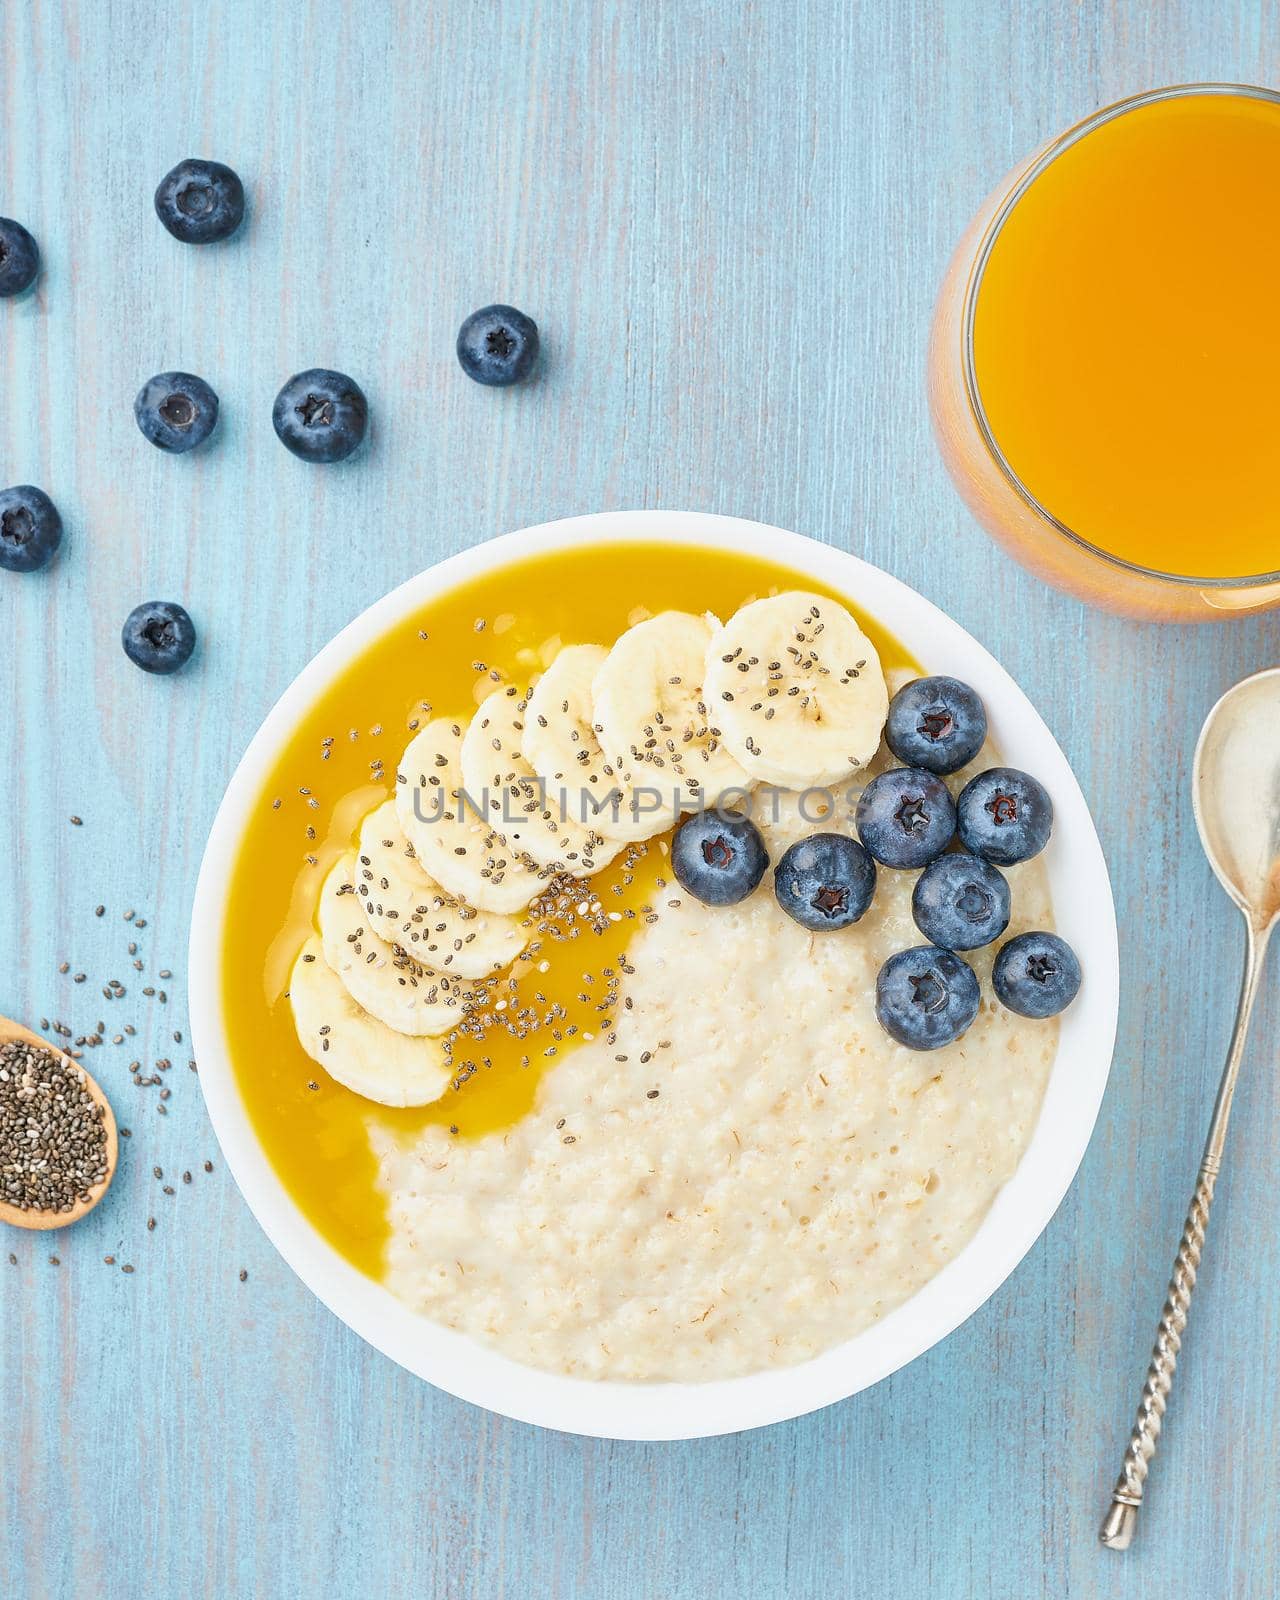 Oatmeal with bananas, blueberries, chia seeds, jam on blue wooden background by NataBene